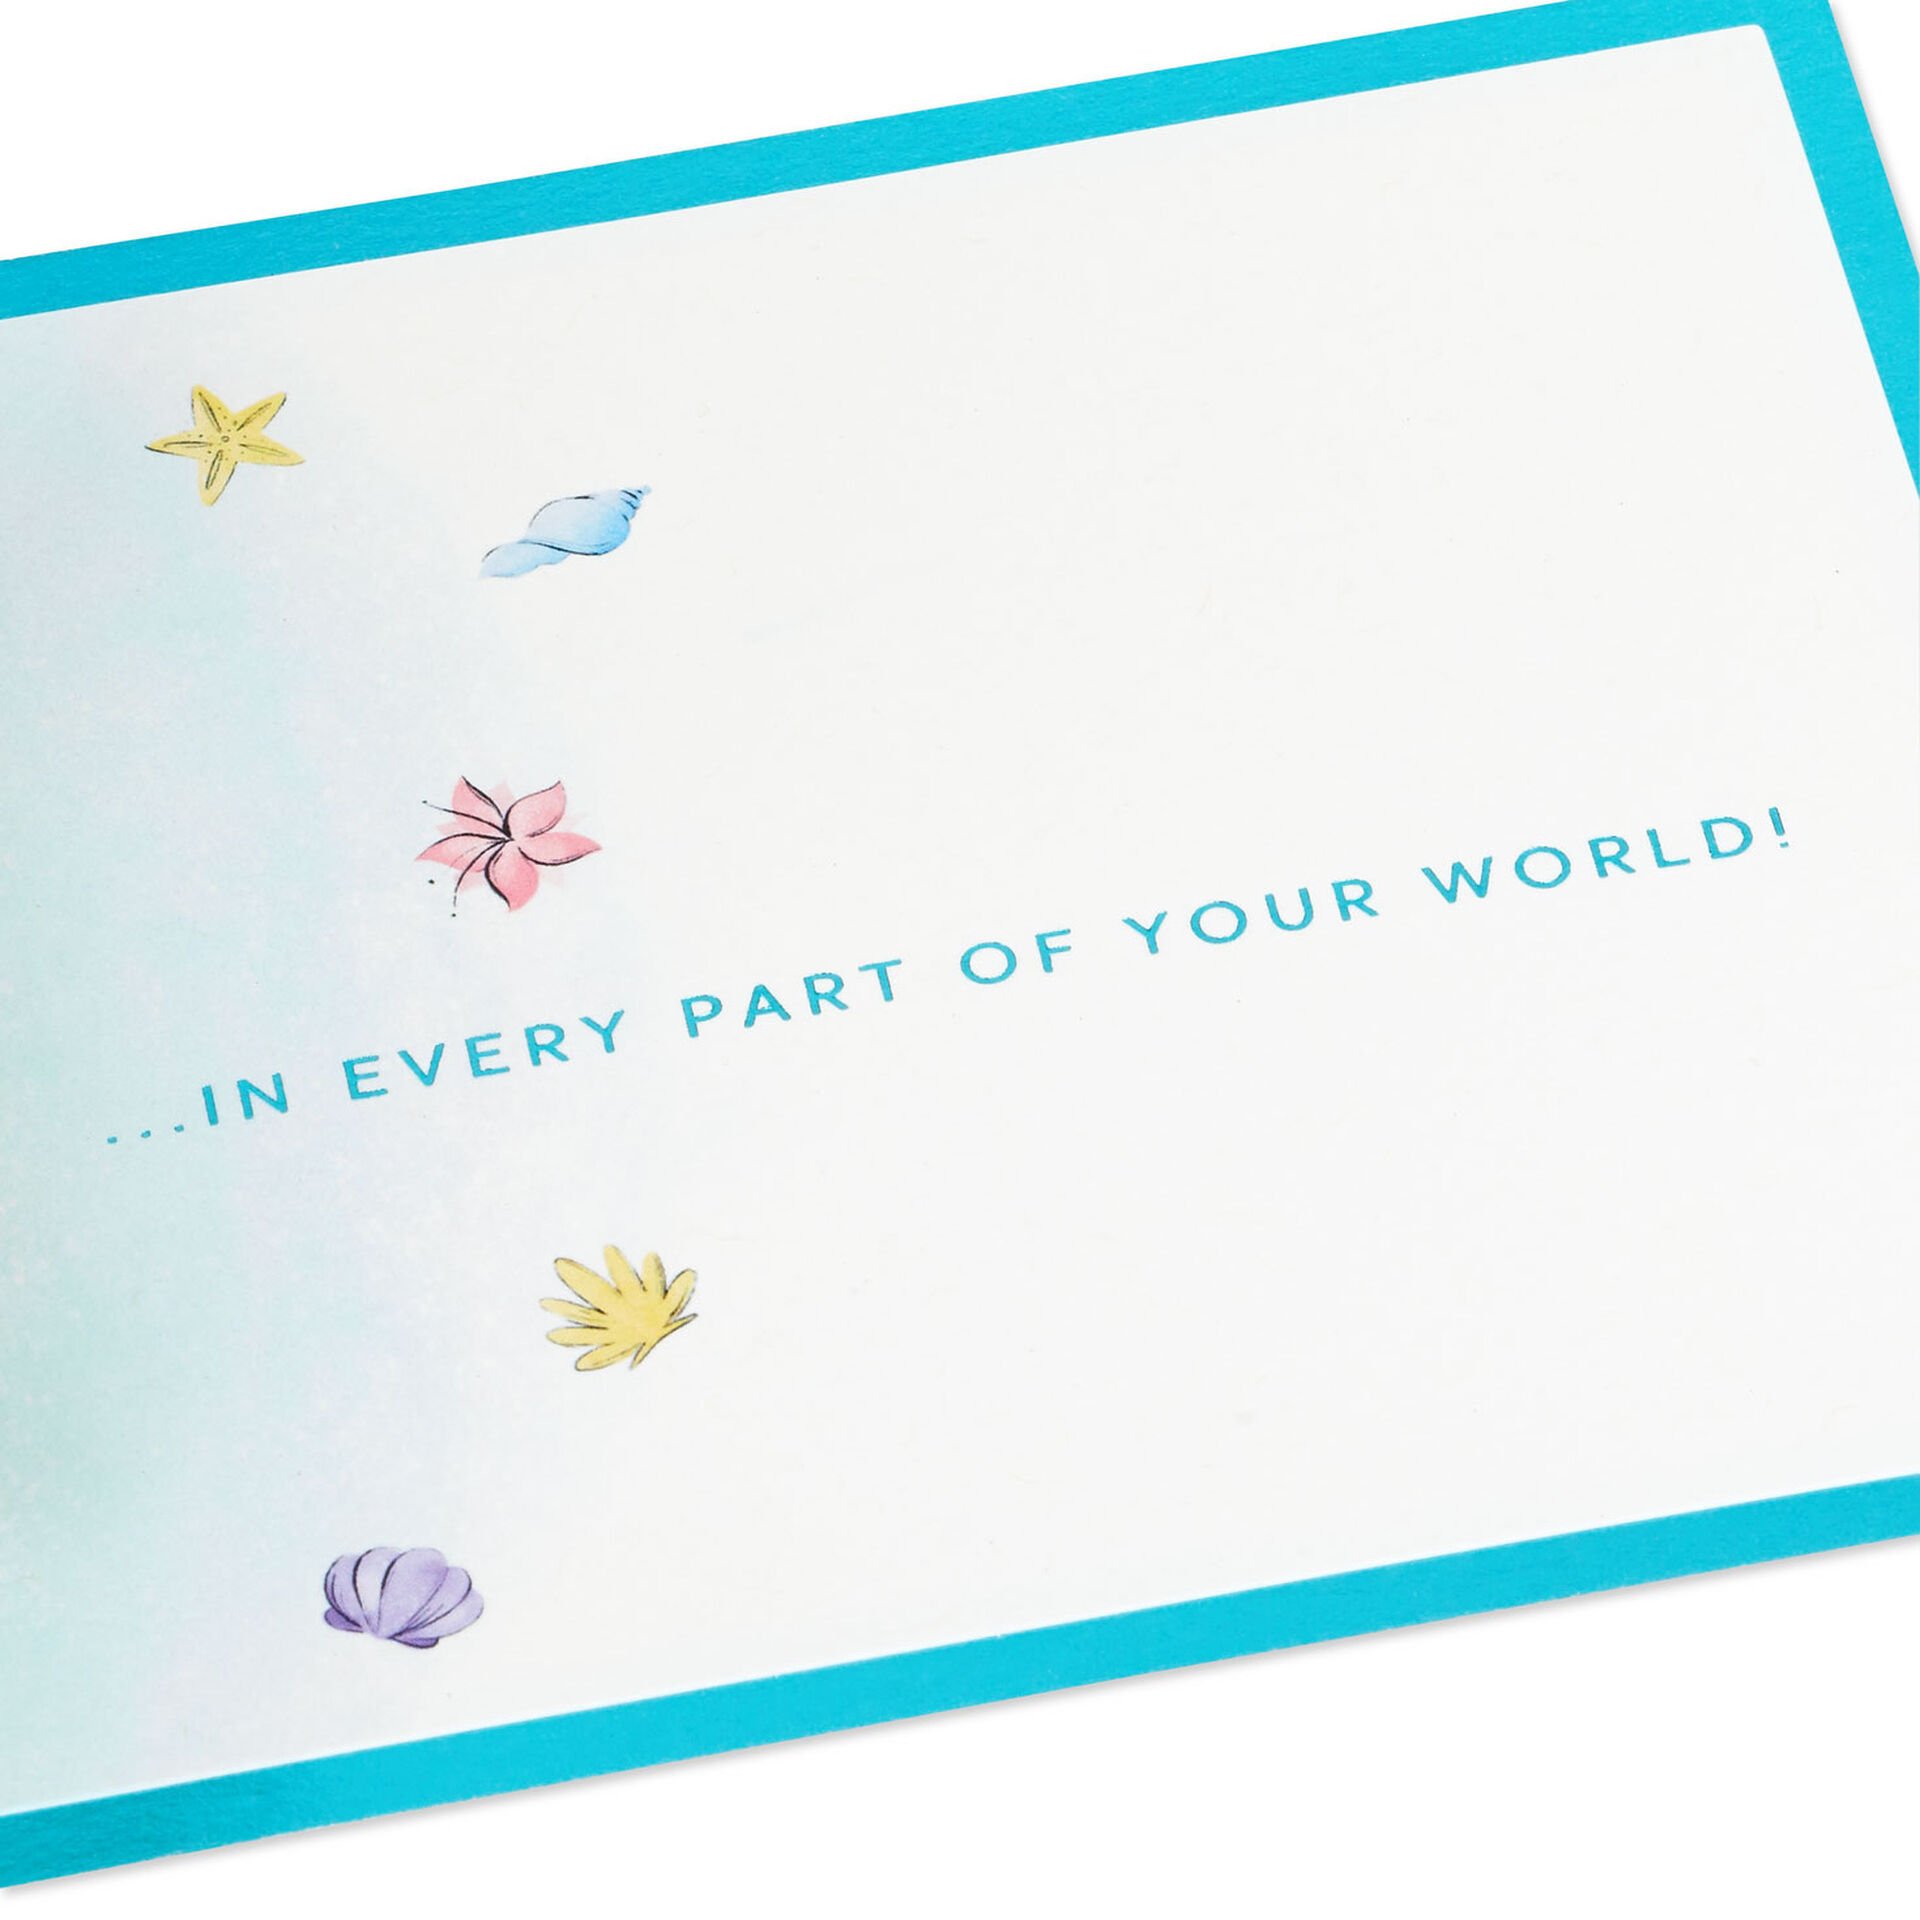 Disney-The-Little-Mermaid-Ariel-3D-PopUp-Card-for-Her_1499LAD2902_03